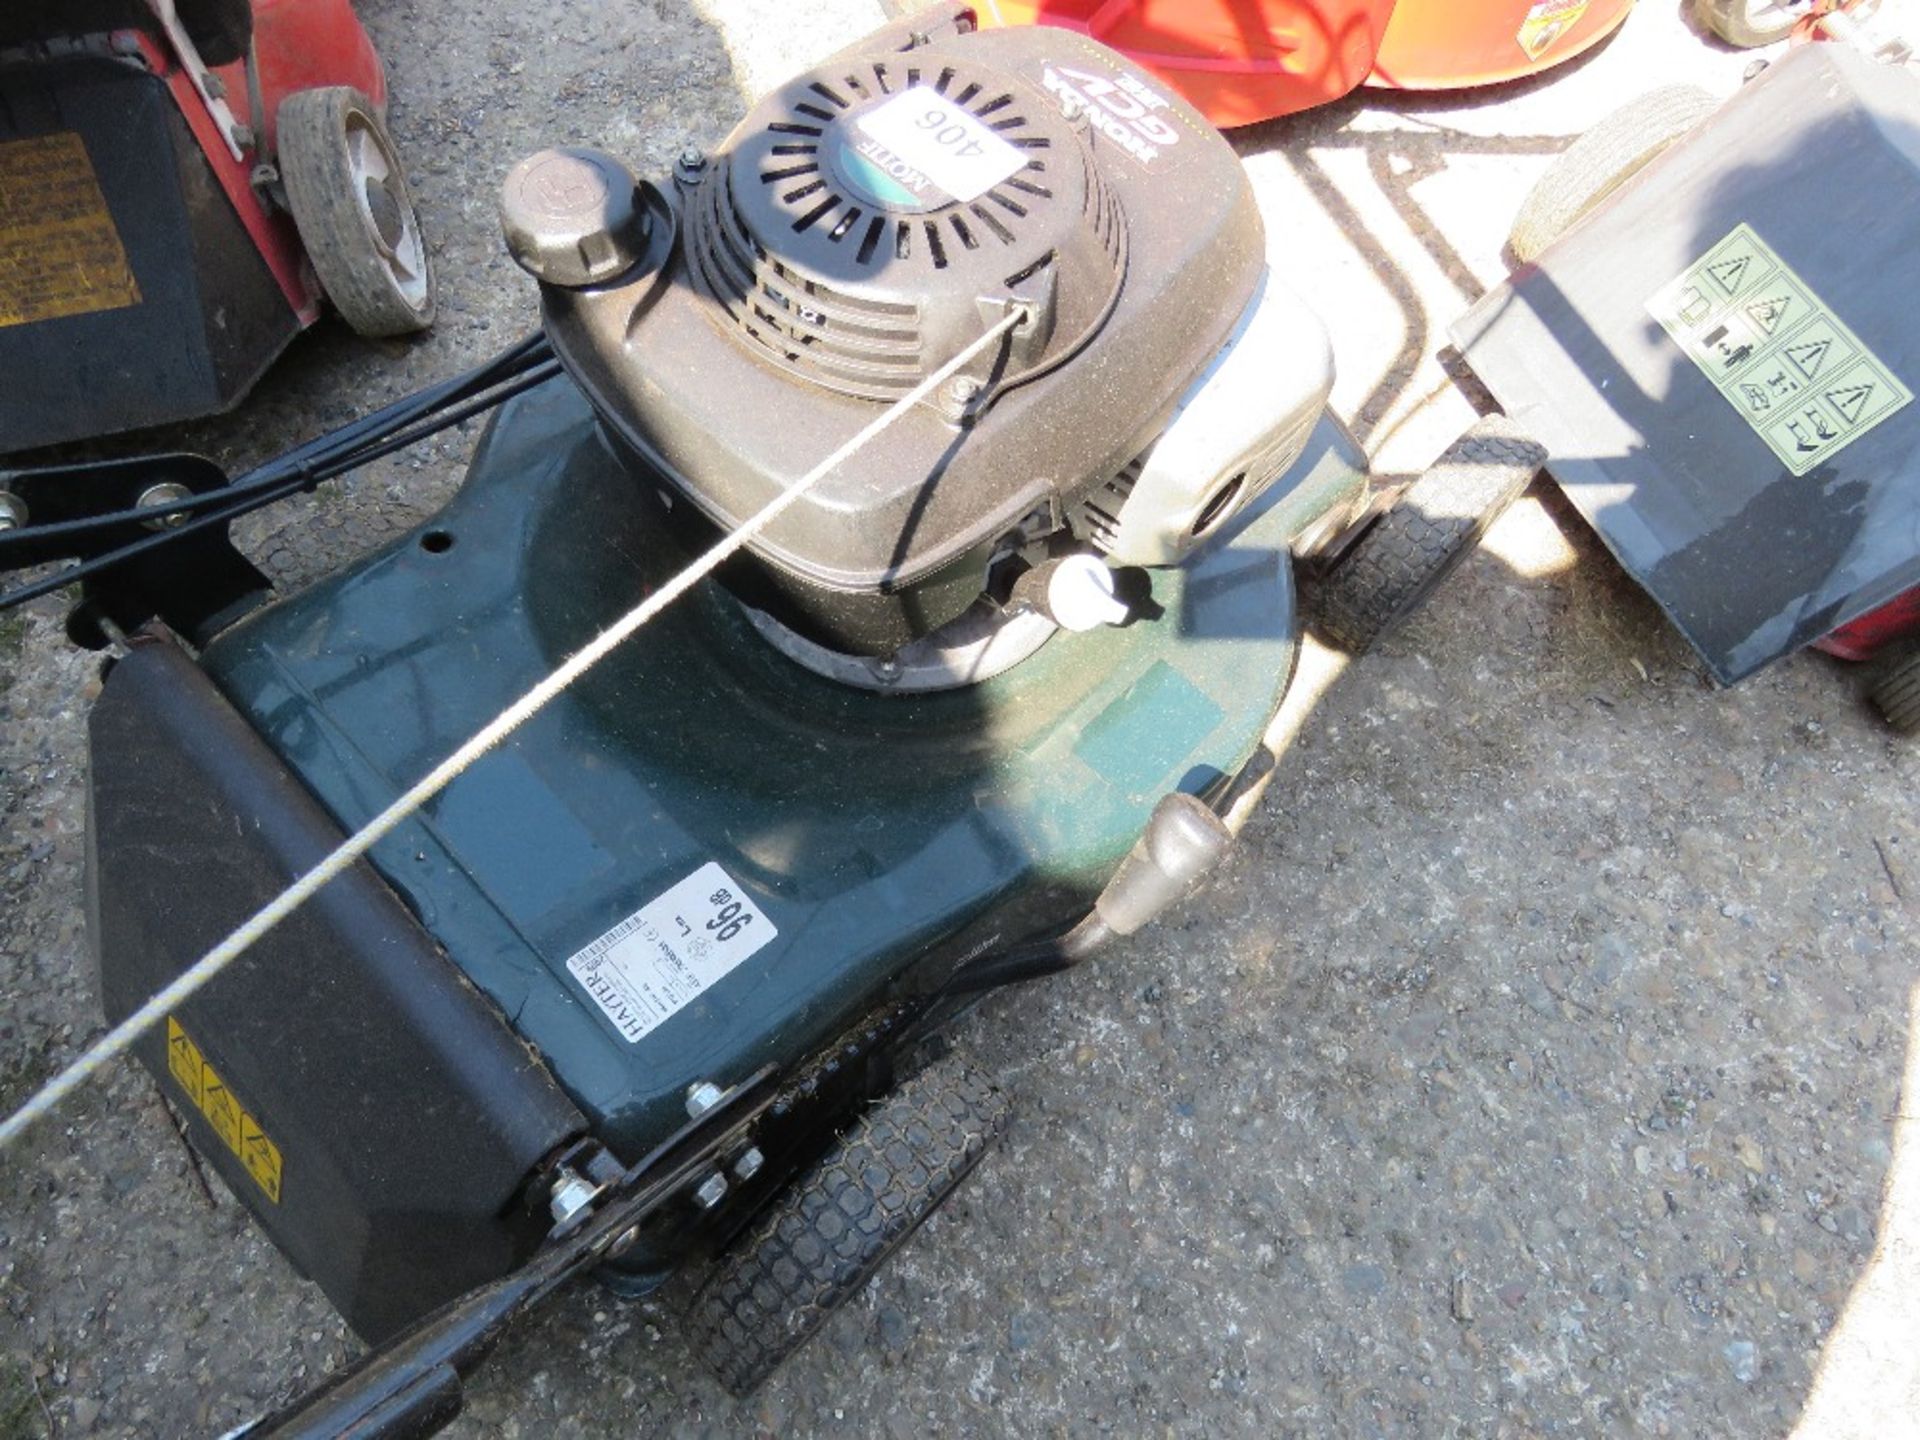 HAYTER MOTIF SELF DRIVE PETROL ENGINED LAWNMOWER, NO COLLECTOR. THIS LOT IS SOLD UNDER THE AUCTIO - Image 4 of 4